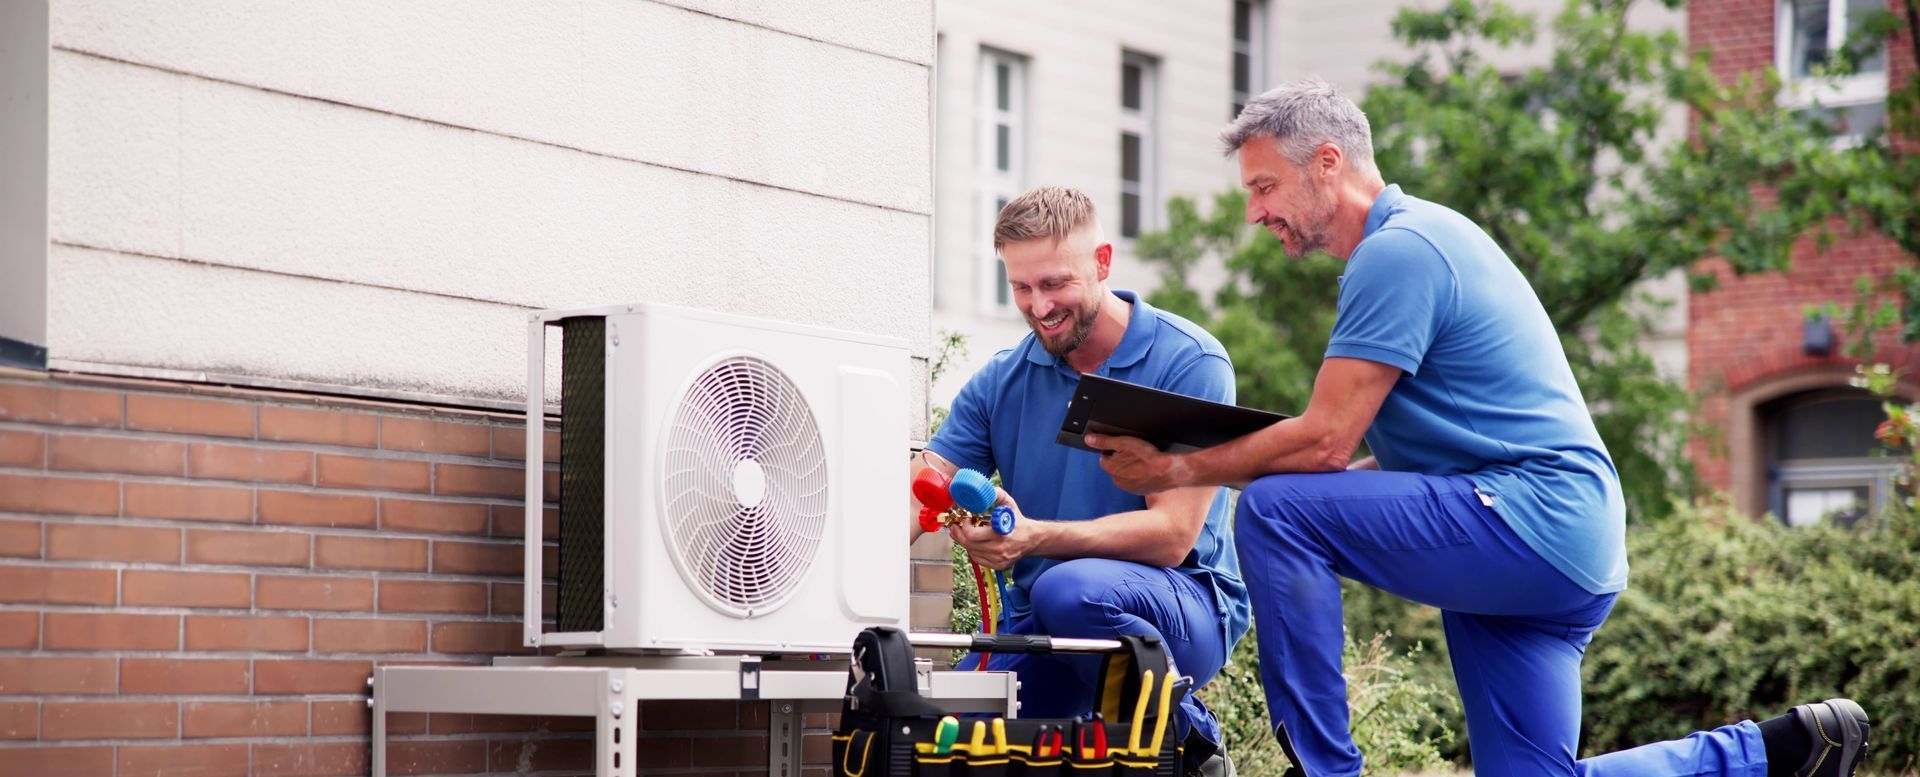 Two men are working on an air conditioner outside of a building.